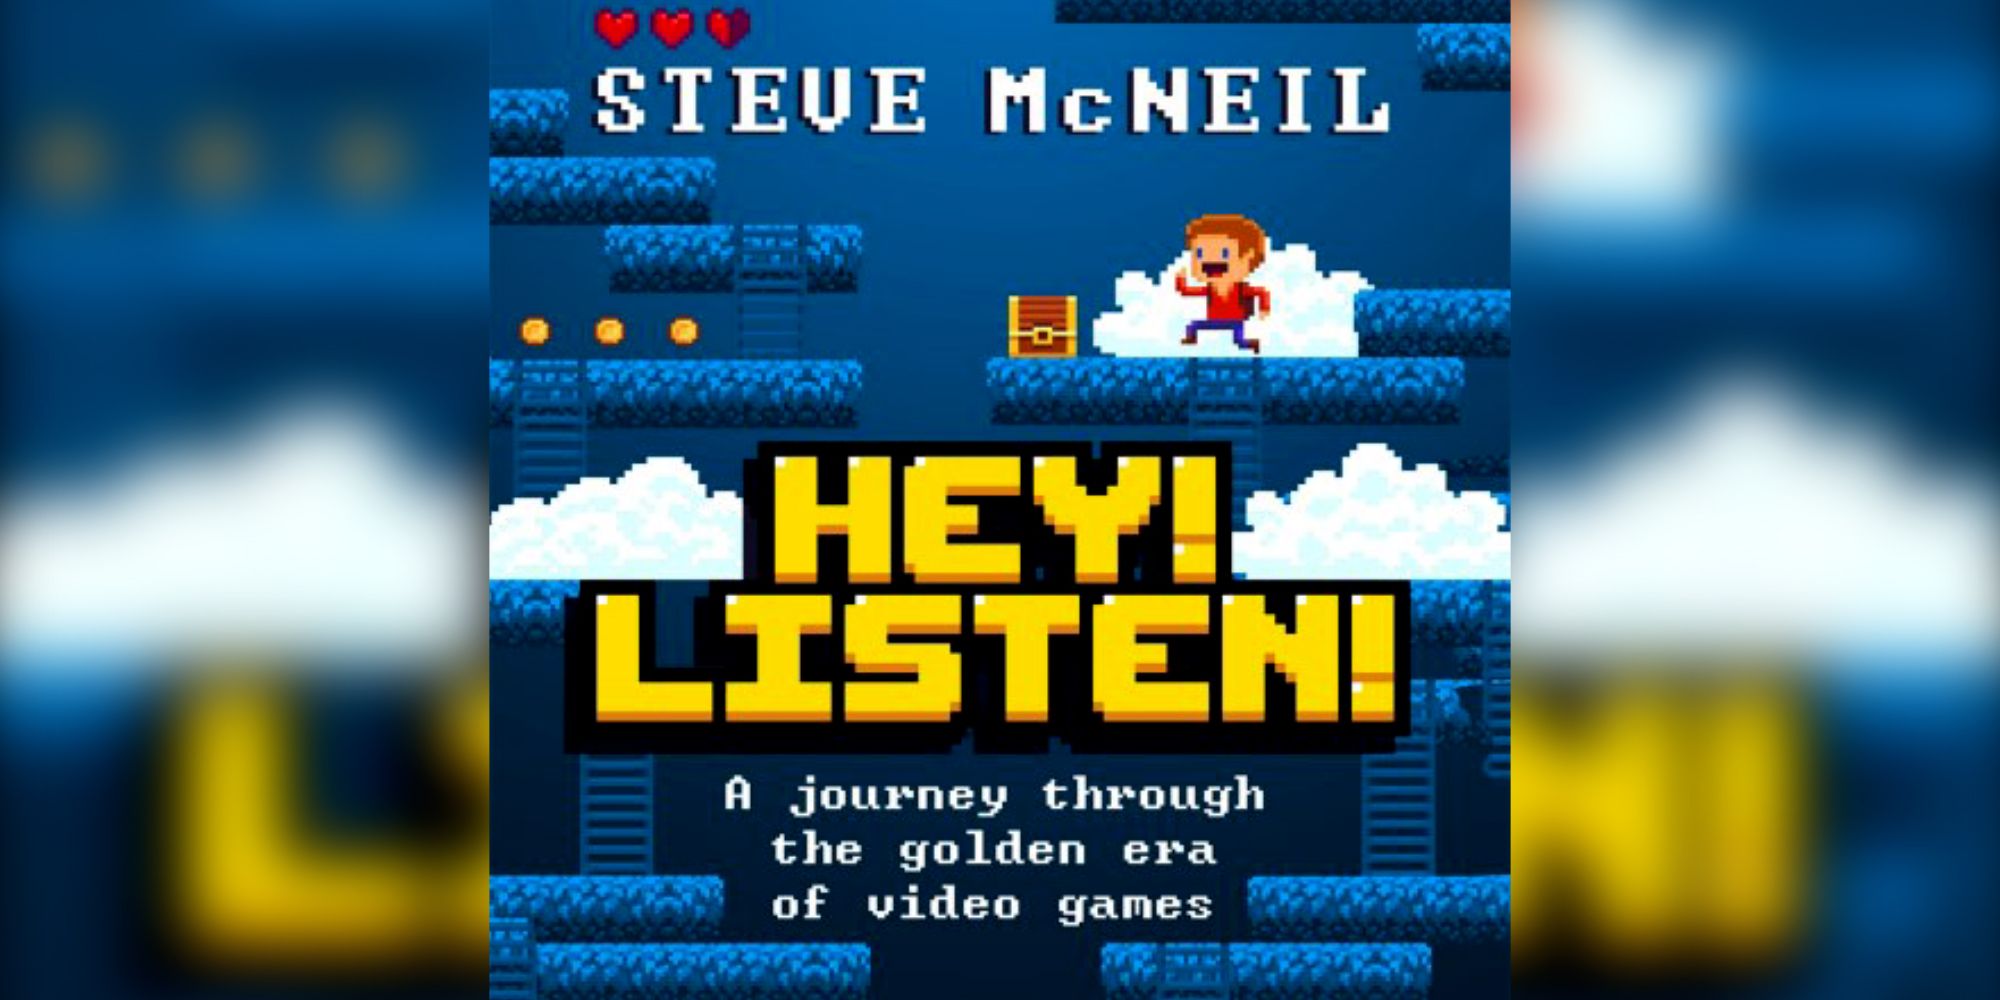 The Cover of Hey! Listen! By Steve McNeil